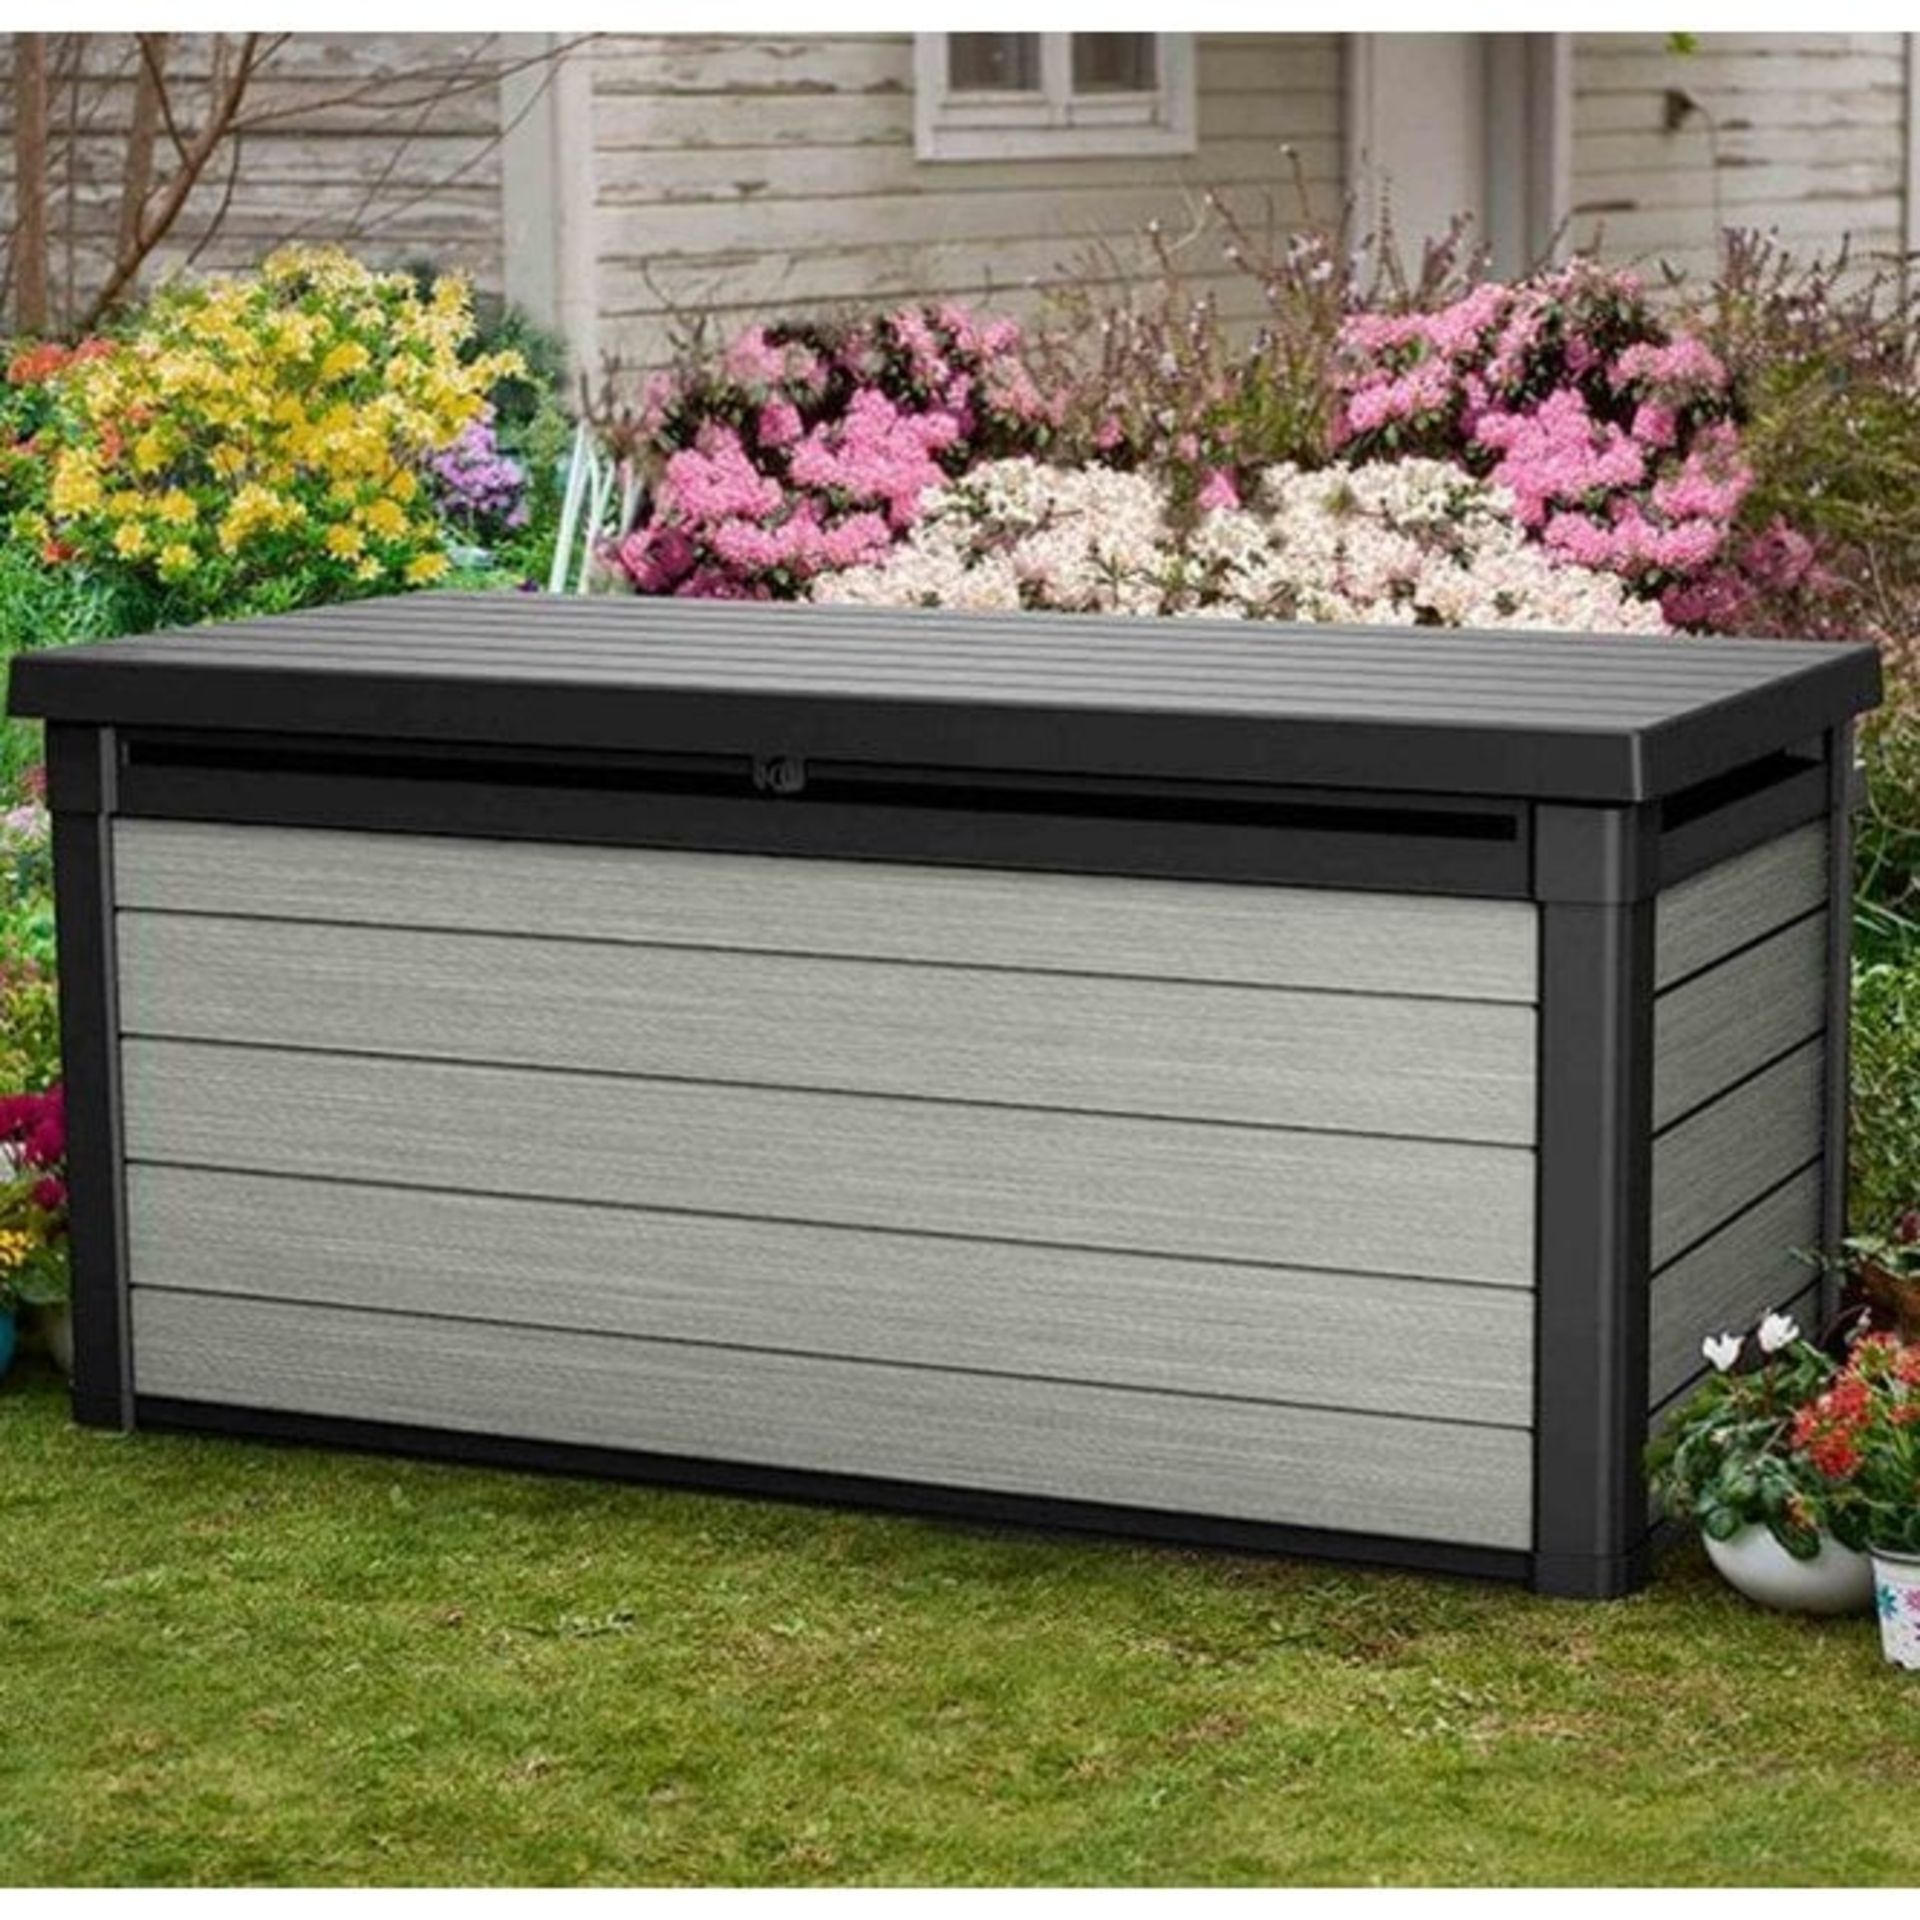 Keter Denali 150L Deck Box Sturdy and versatile, the Denali 150L Deck Box is the perfect solution to - Image 3 of 3